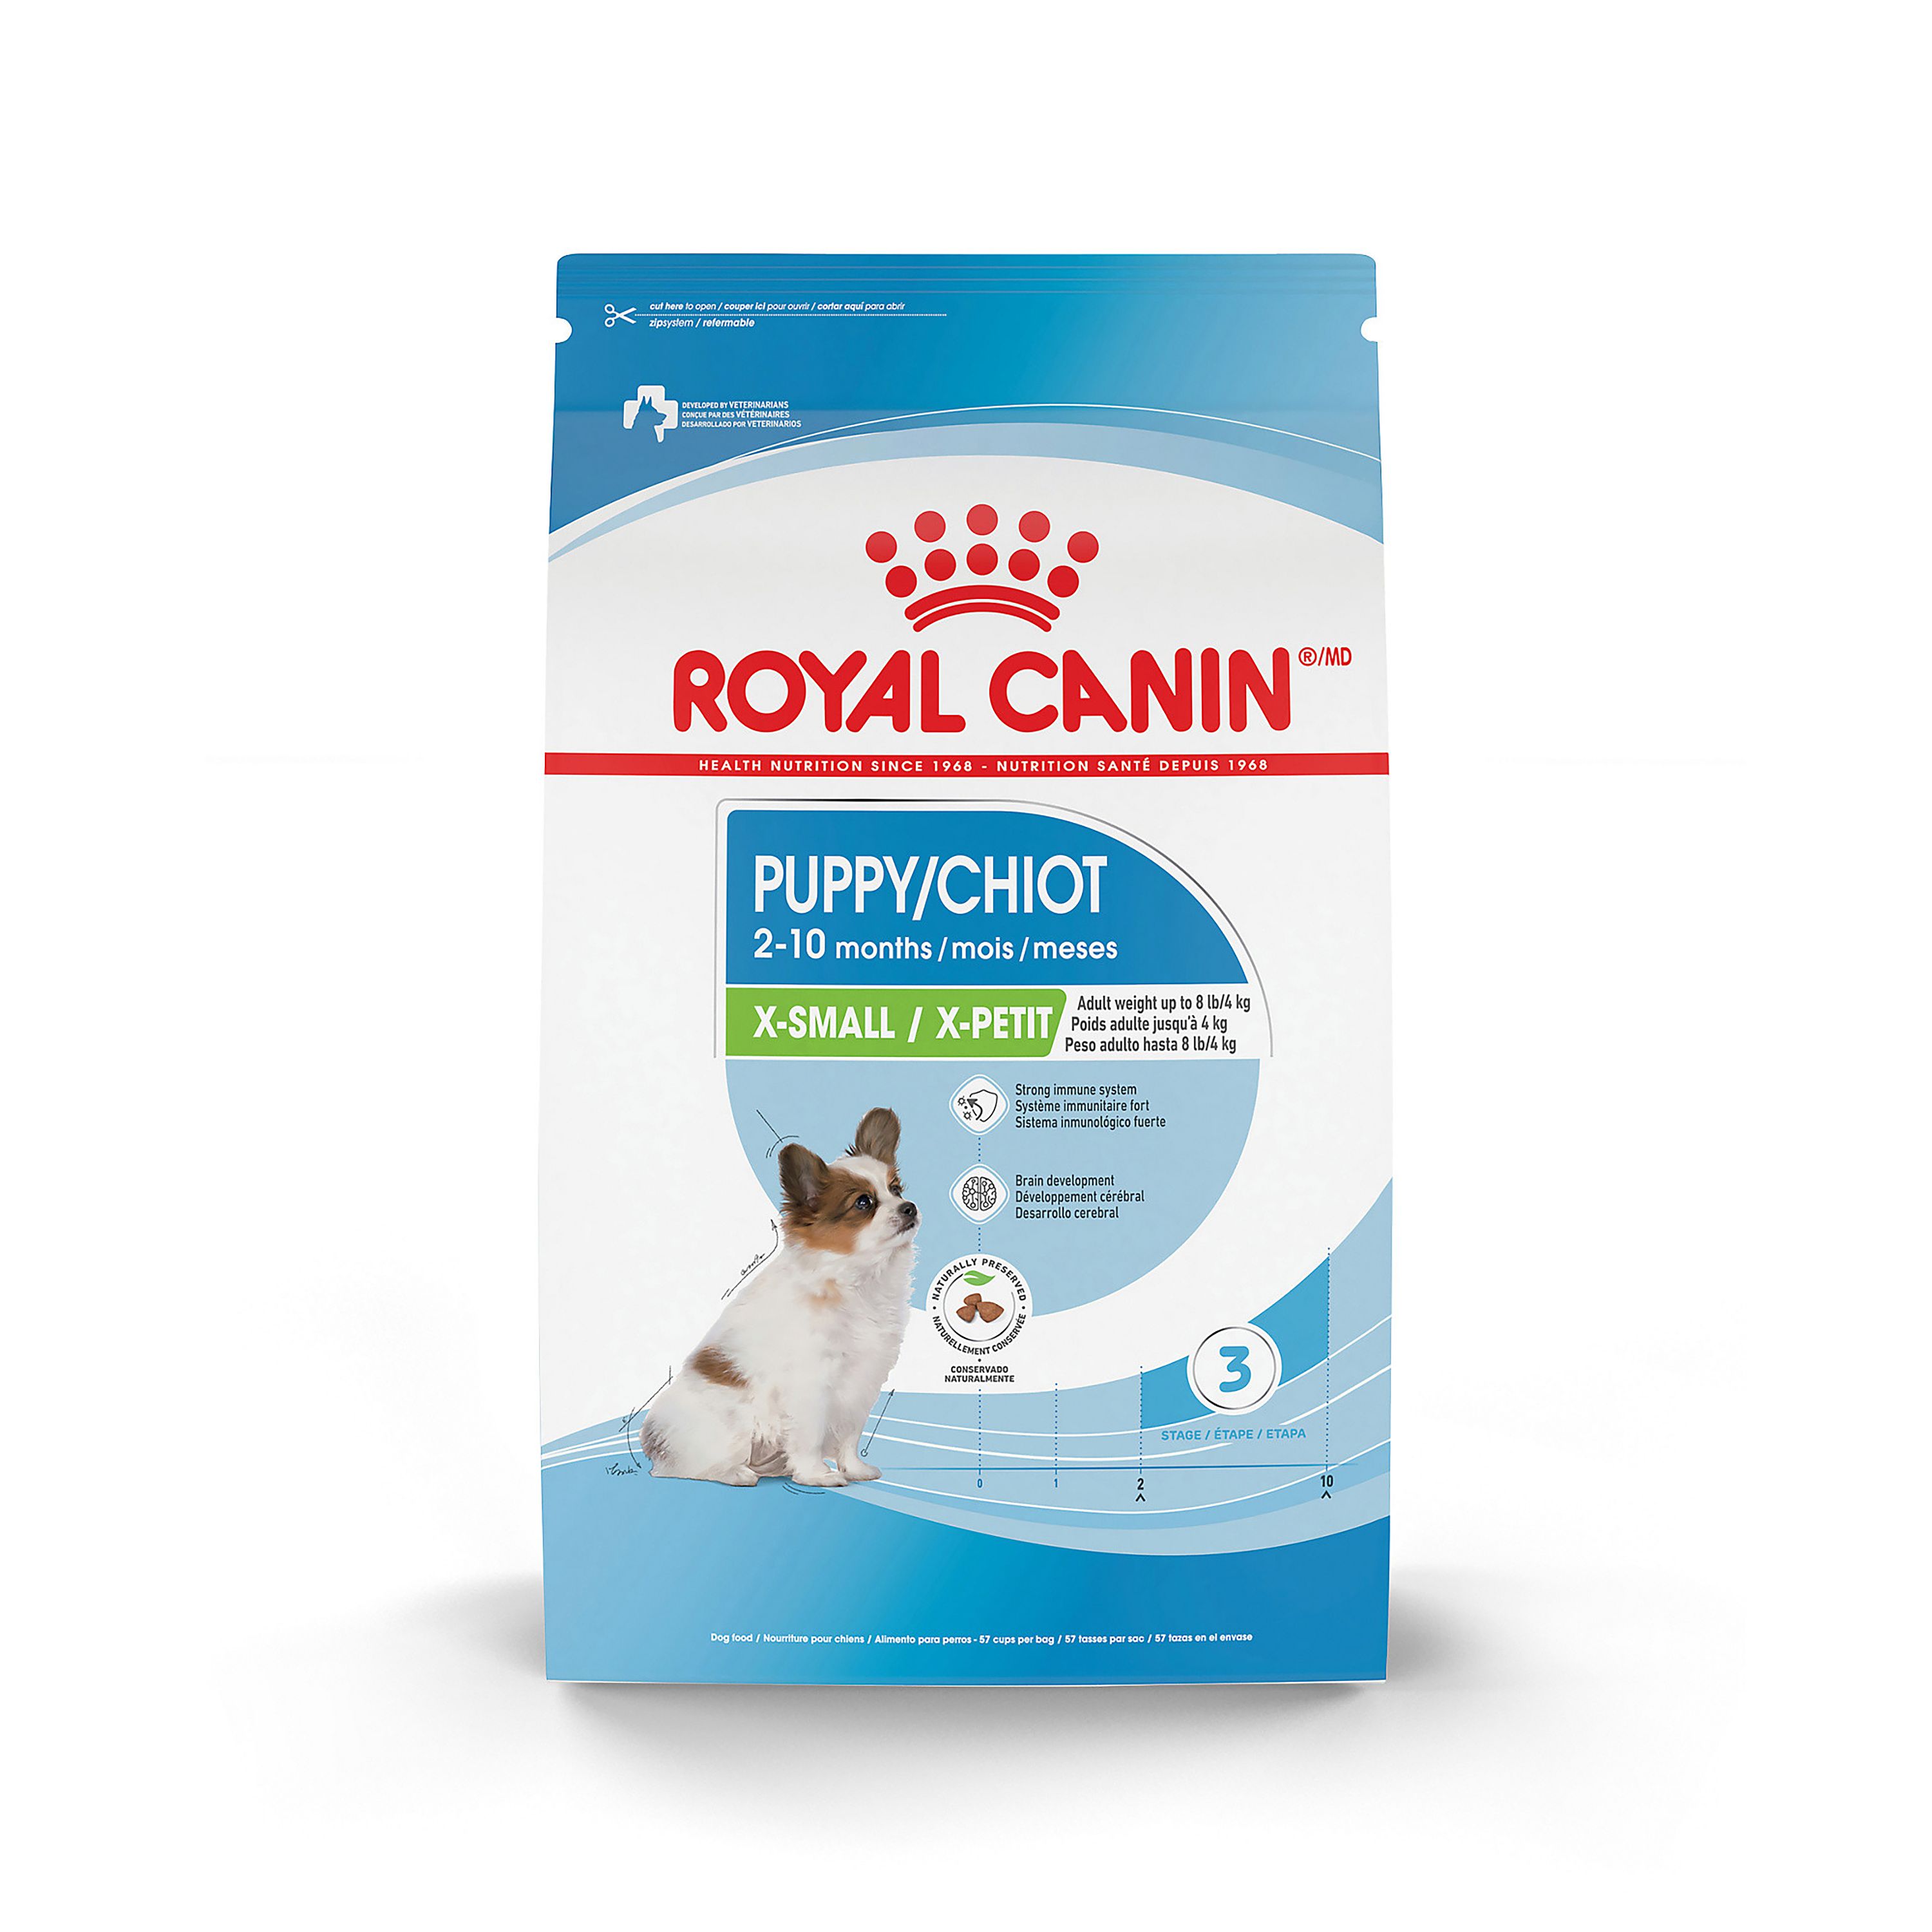 Royal Canin® Size Health Nutrition X-Small Puppy Food dog Dry Food | PetSmart